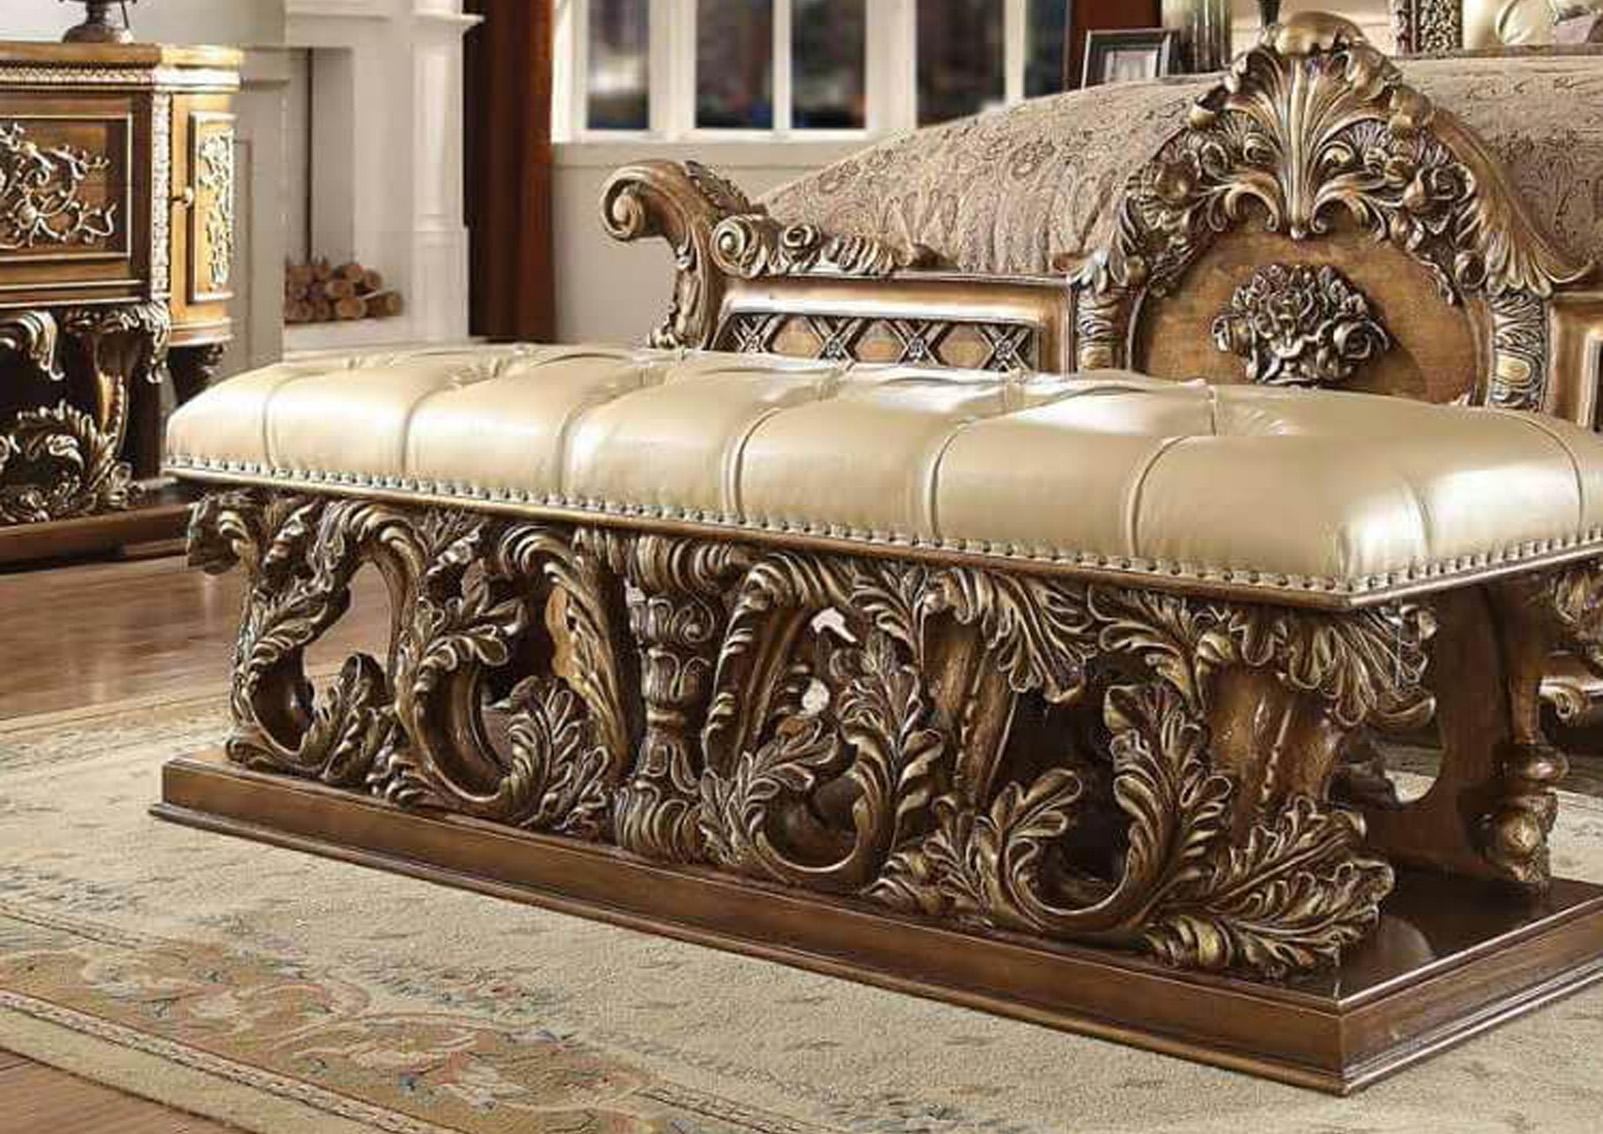 Traditional Bench BD00476 BD00476 in Metallic, Gold, Brown Faux Leather